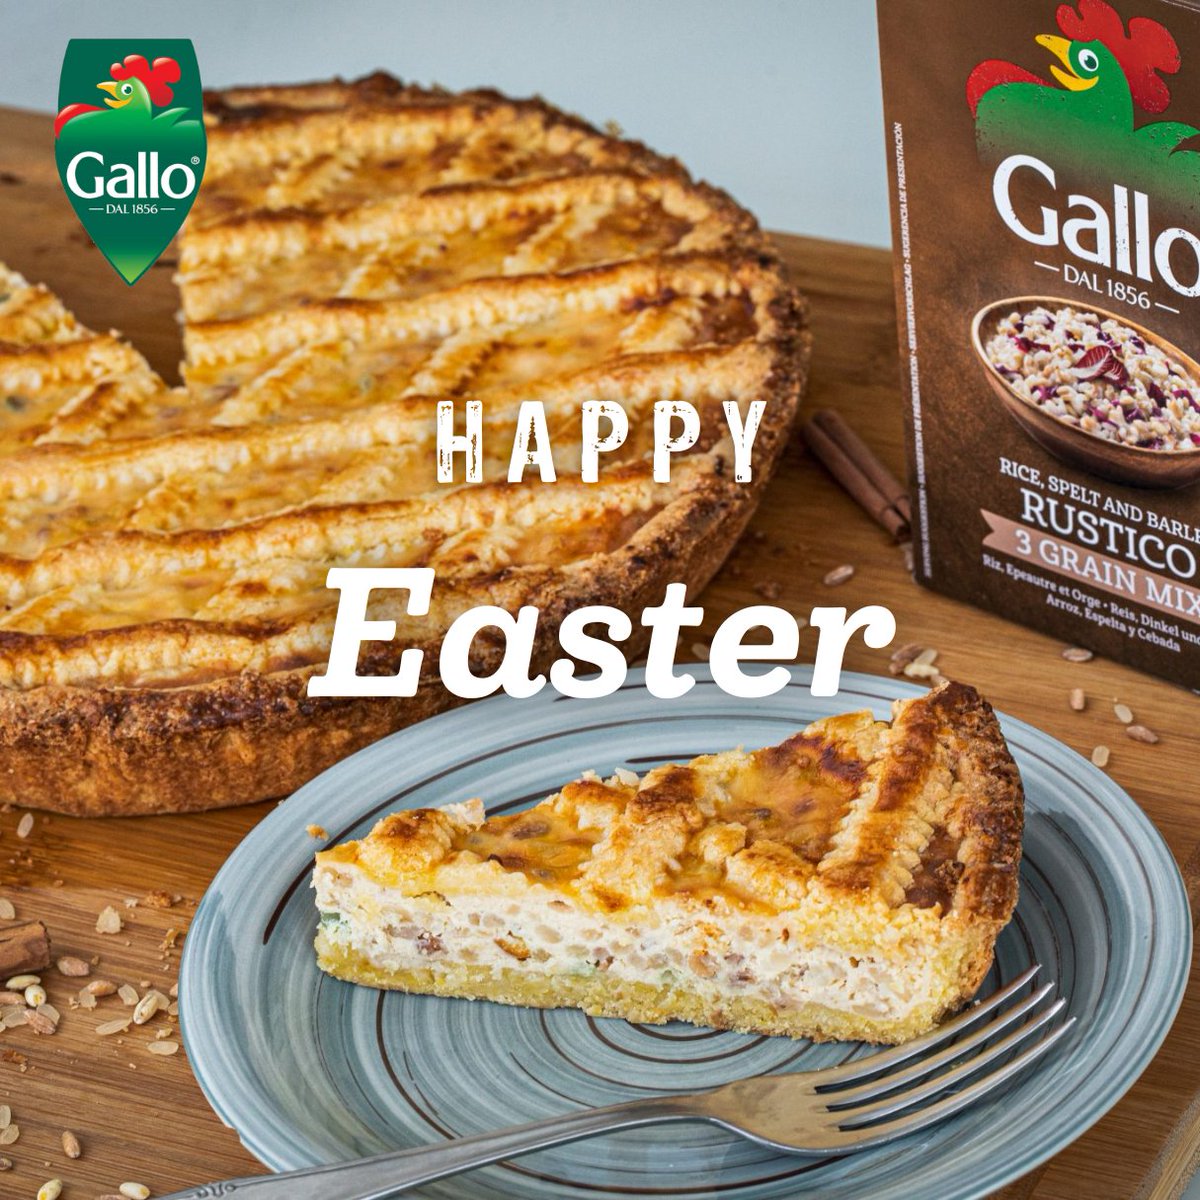 Wishing you a joyous Easter season from everyone at Riso Gallo! Indulge in the delicious Neapolitan Pastiera with your loved ones during the holidays, symbolising family togetherness and delicious Sunday meals. 💛 #HappyEaster #Easter #EasterHolidays #EasterFood #RisoGallo